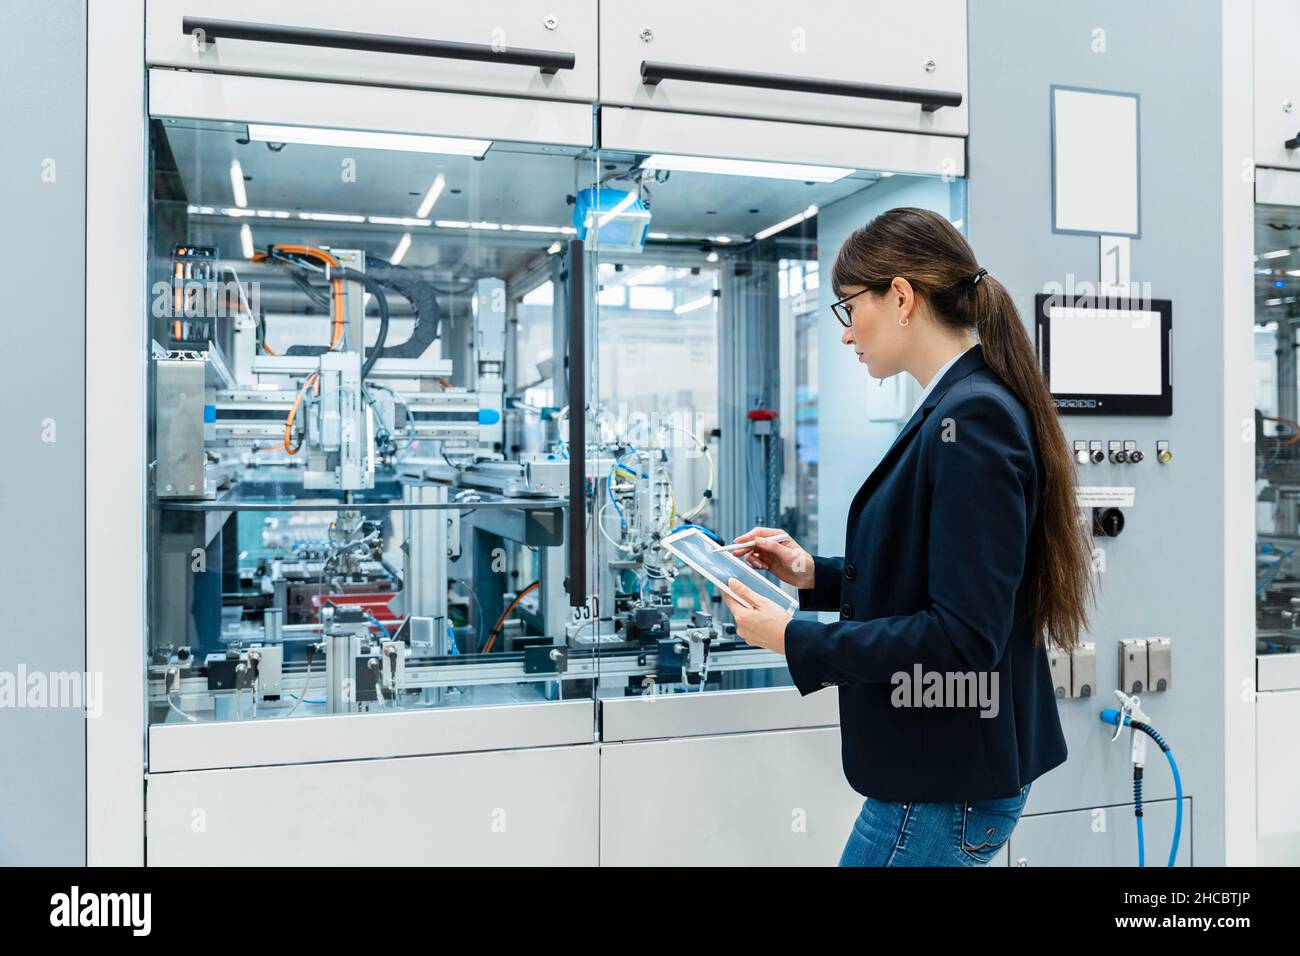 Inspector using tablet PC at industrial machinery Stock Photo